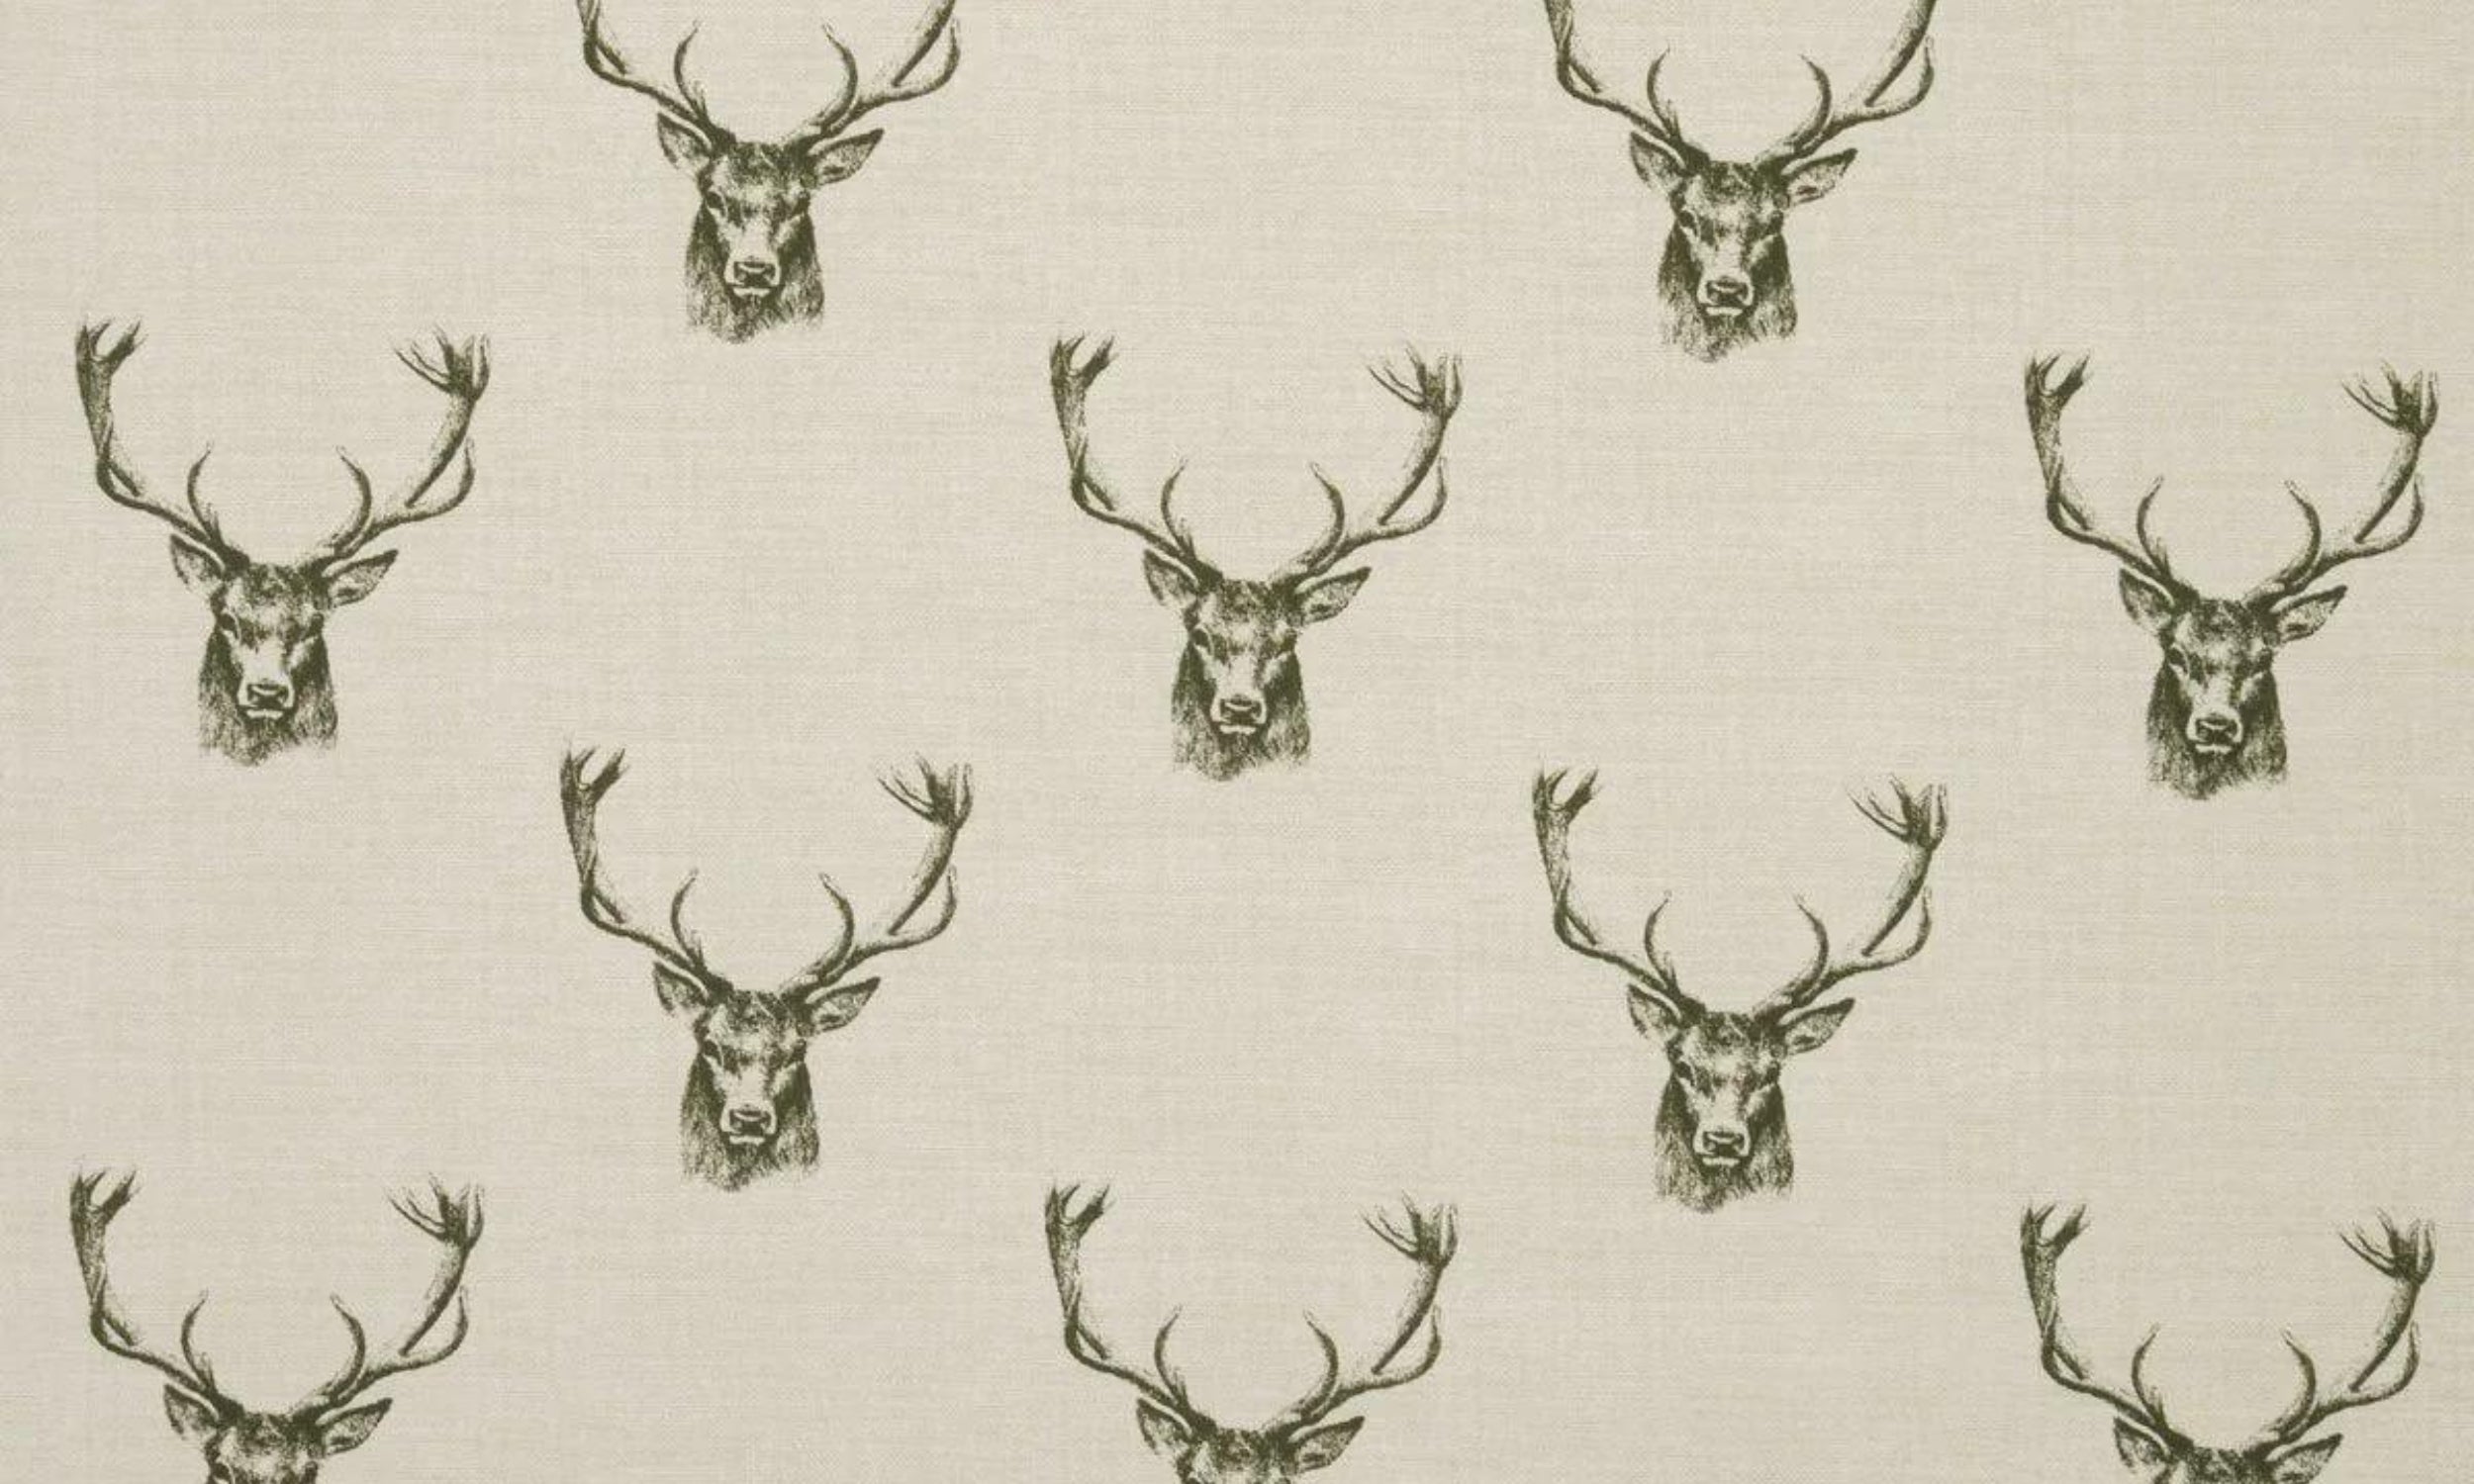 Stand Out From the Crowd with Stag Head Printed Curtains